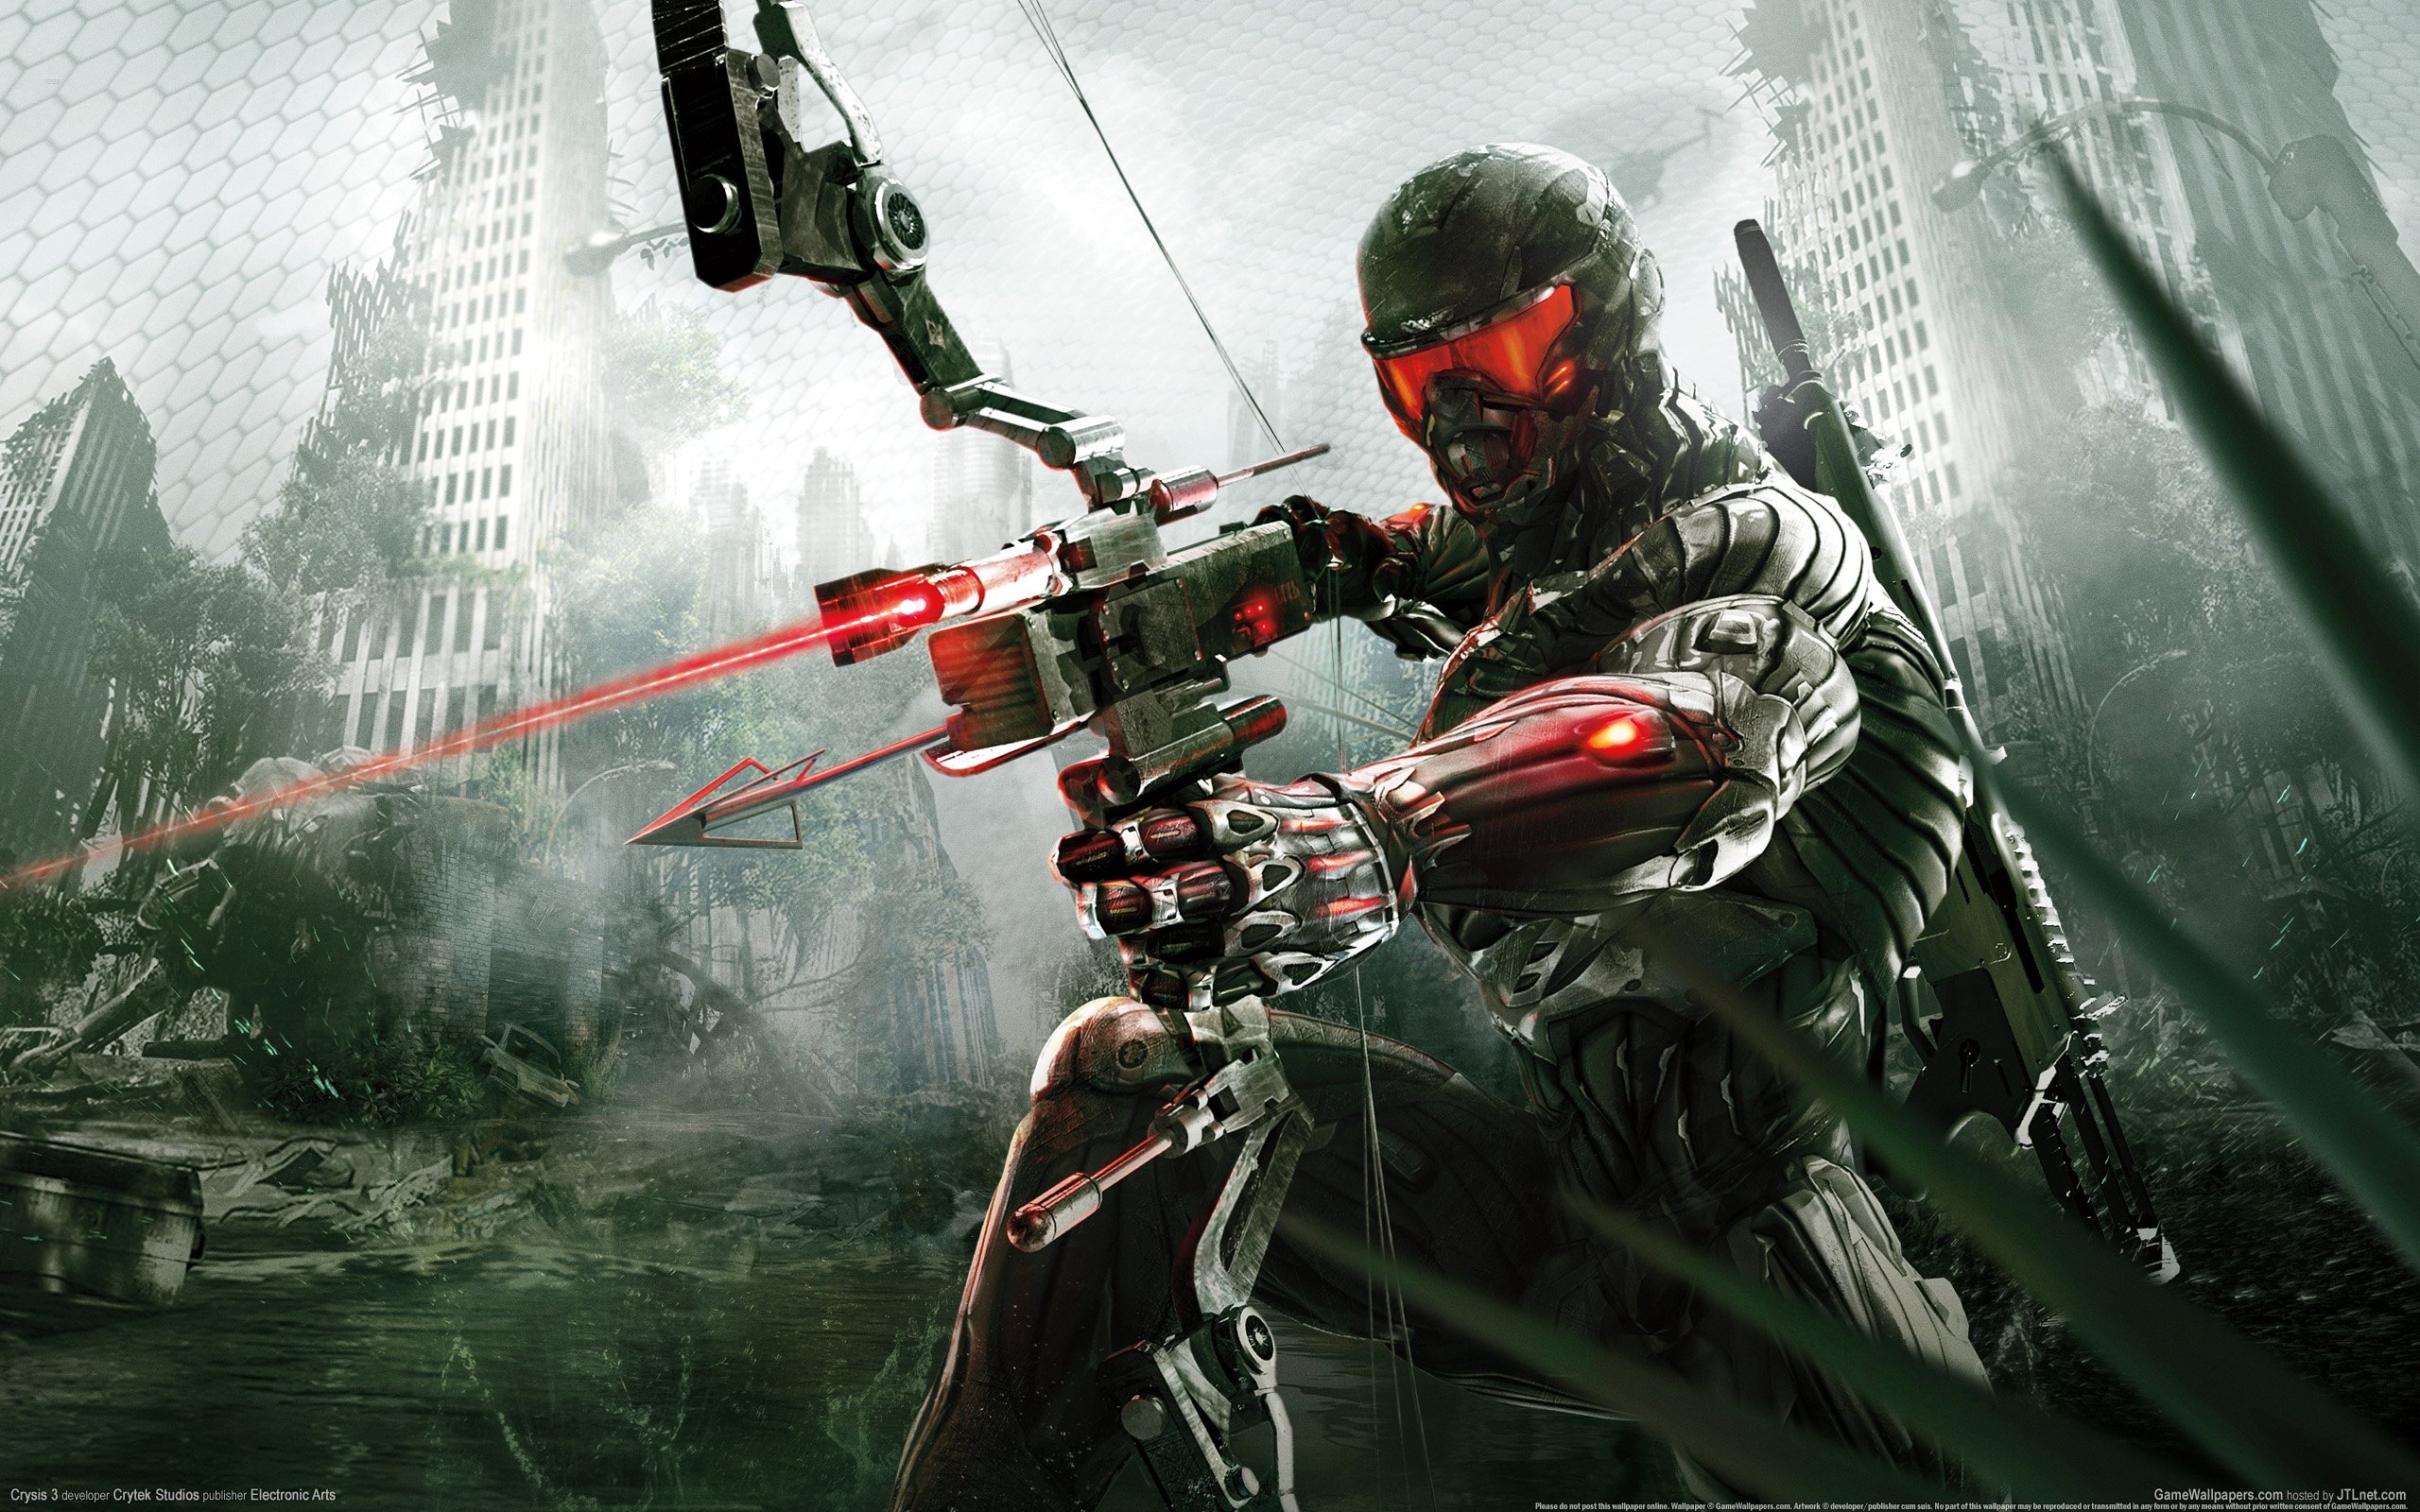 crysis, Sci fi, Fps, Shooter, Action, Fighing, Futuristic, Warrior, Military, Apocalyptic Wallpaper